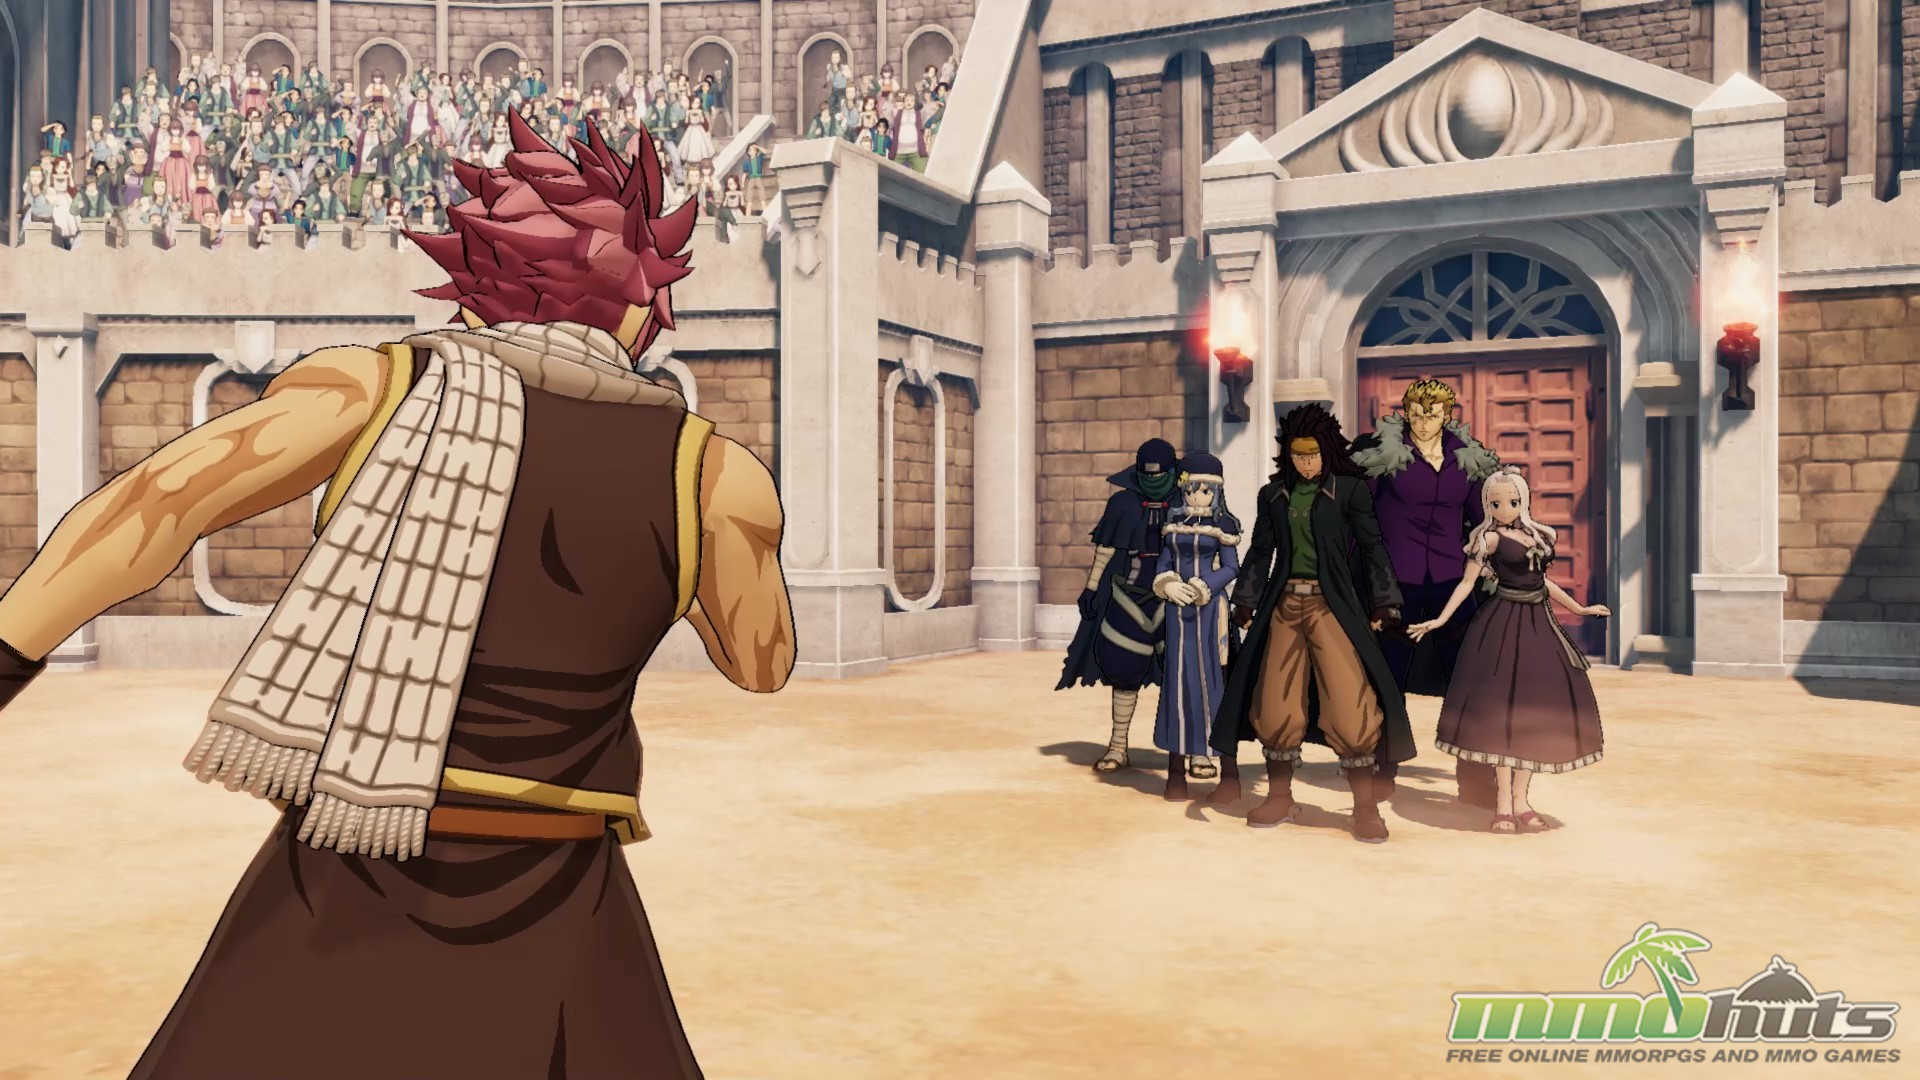 Review of Fairy Tail: Hero's Journey - MMO & MMORPG Games